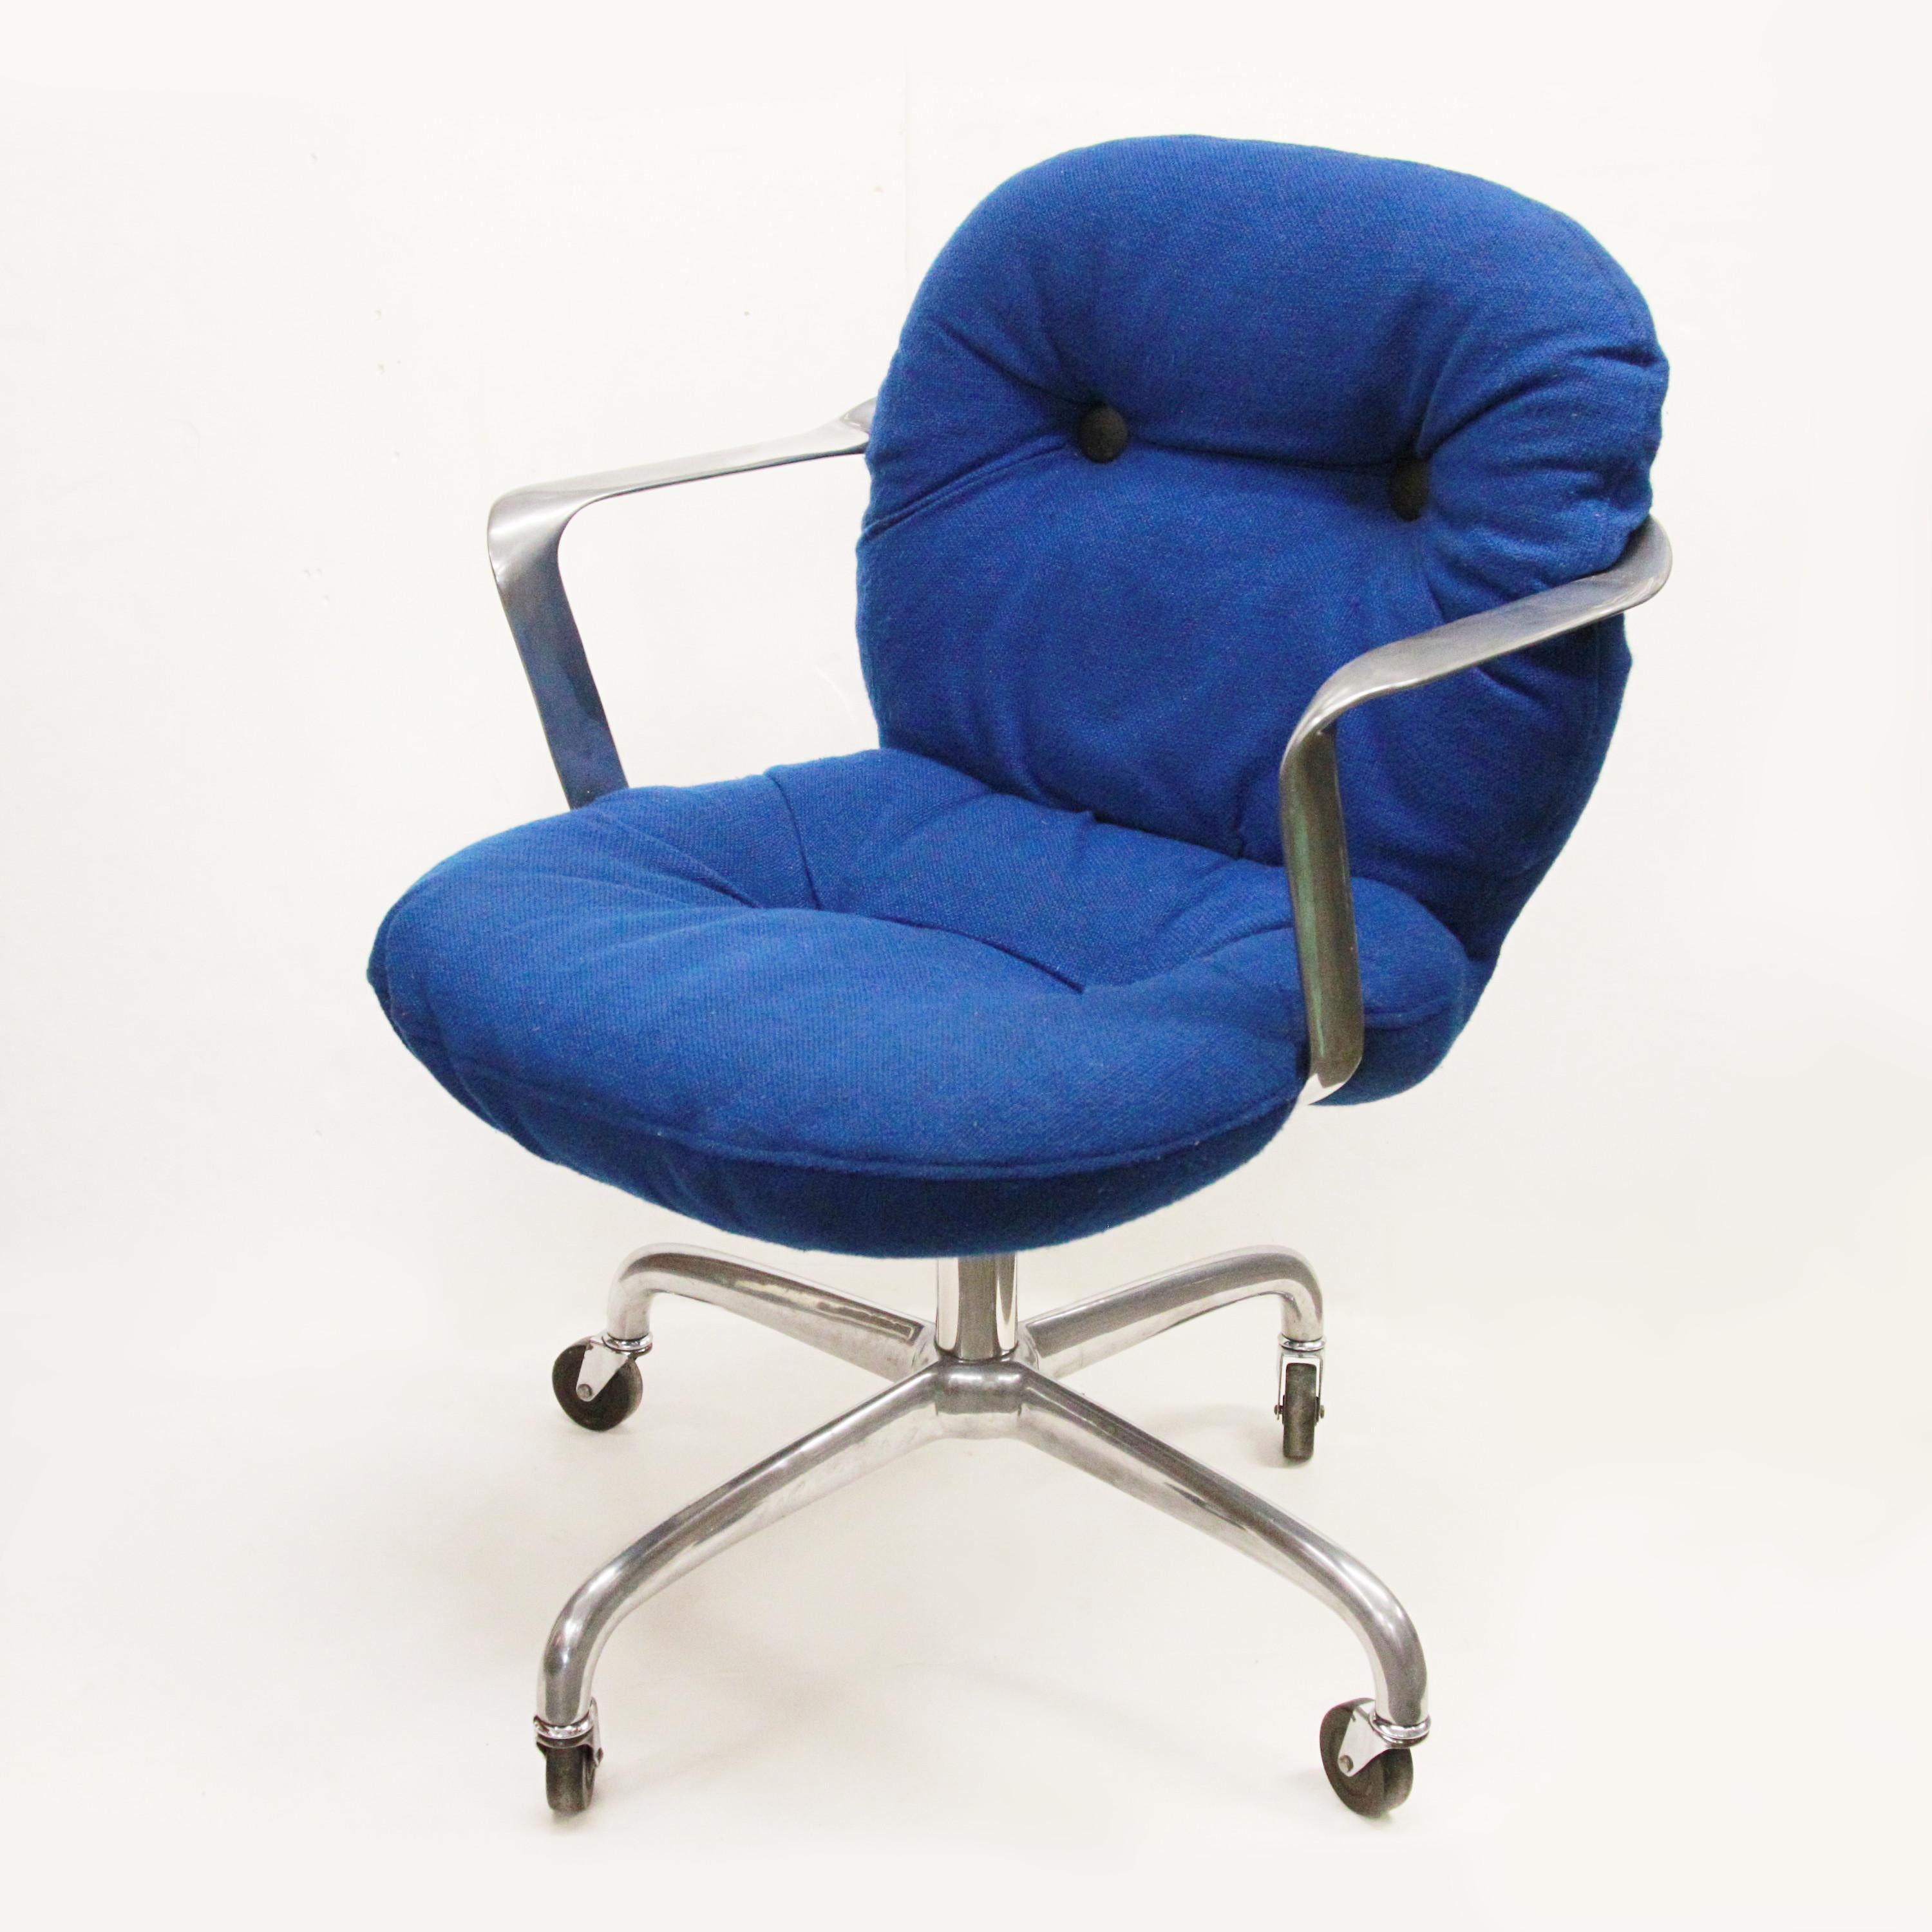 Arguably one of the most elegant desk chair designs from the mid-century era, this Morrison/Hannah design for Knoll Studios is utilitarian sculpture at its best. Chair features a curvaceous, cast-aluminum frame, blue tufted cushions, and aluminum